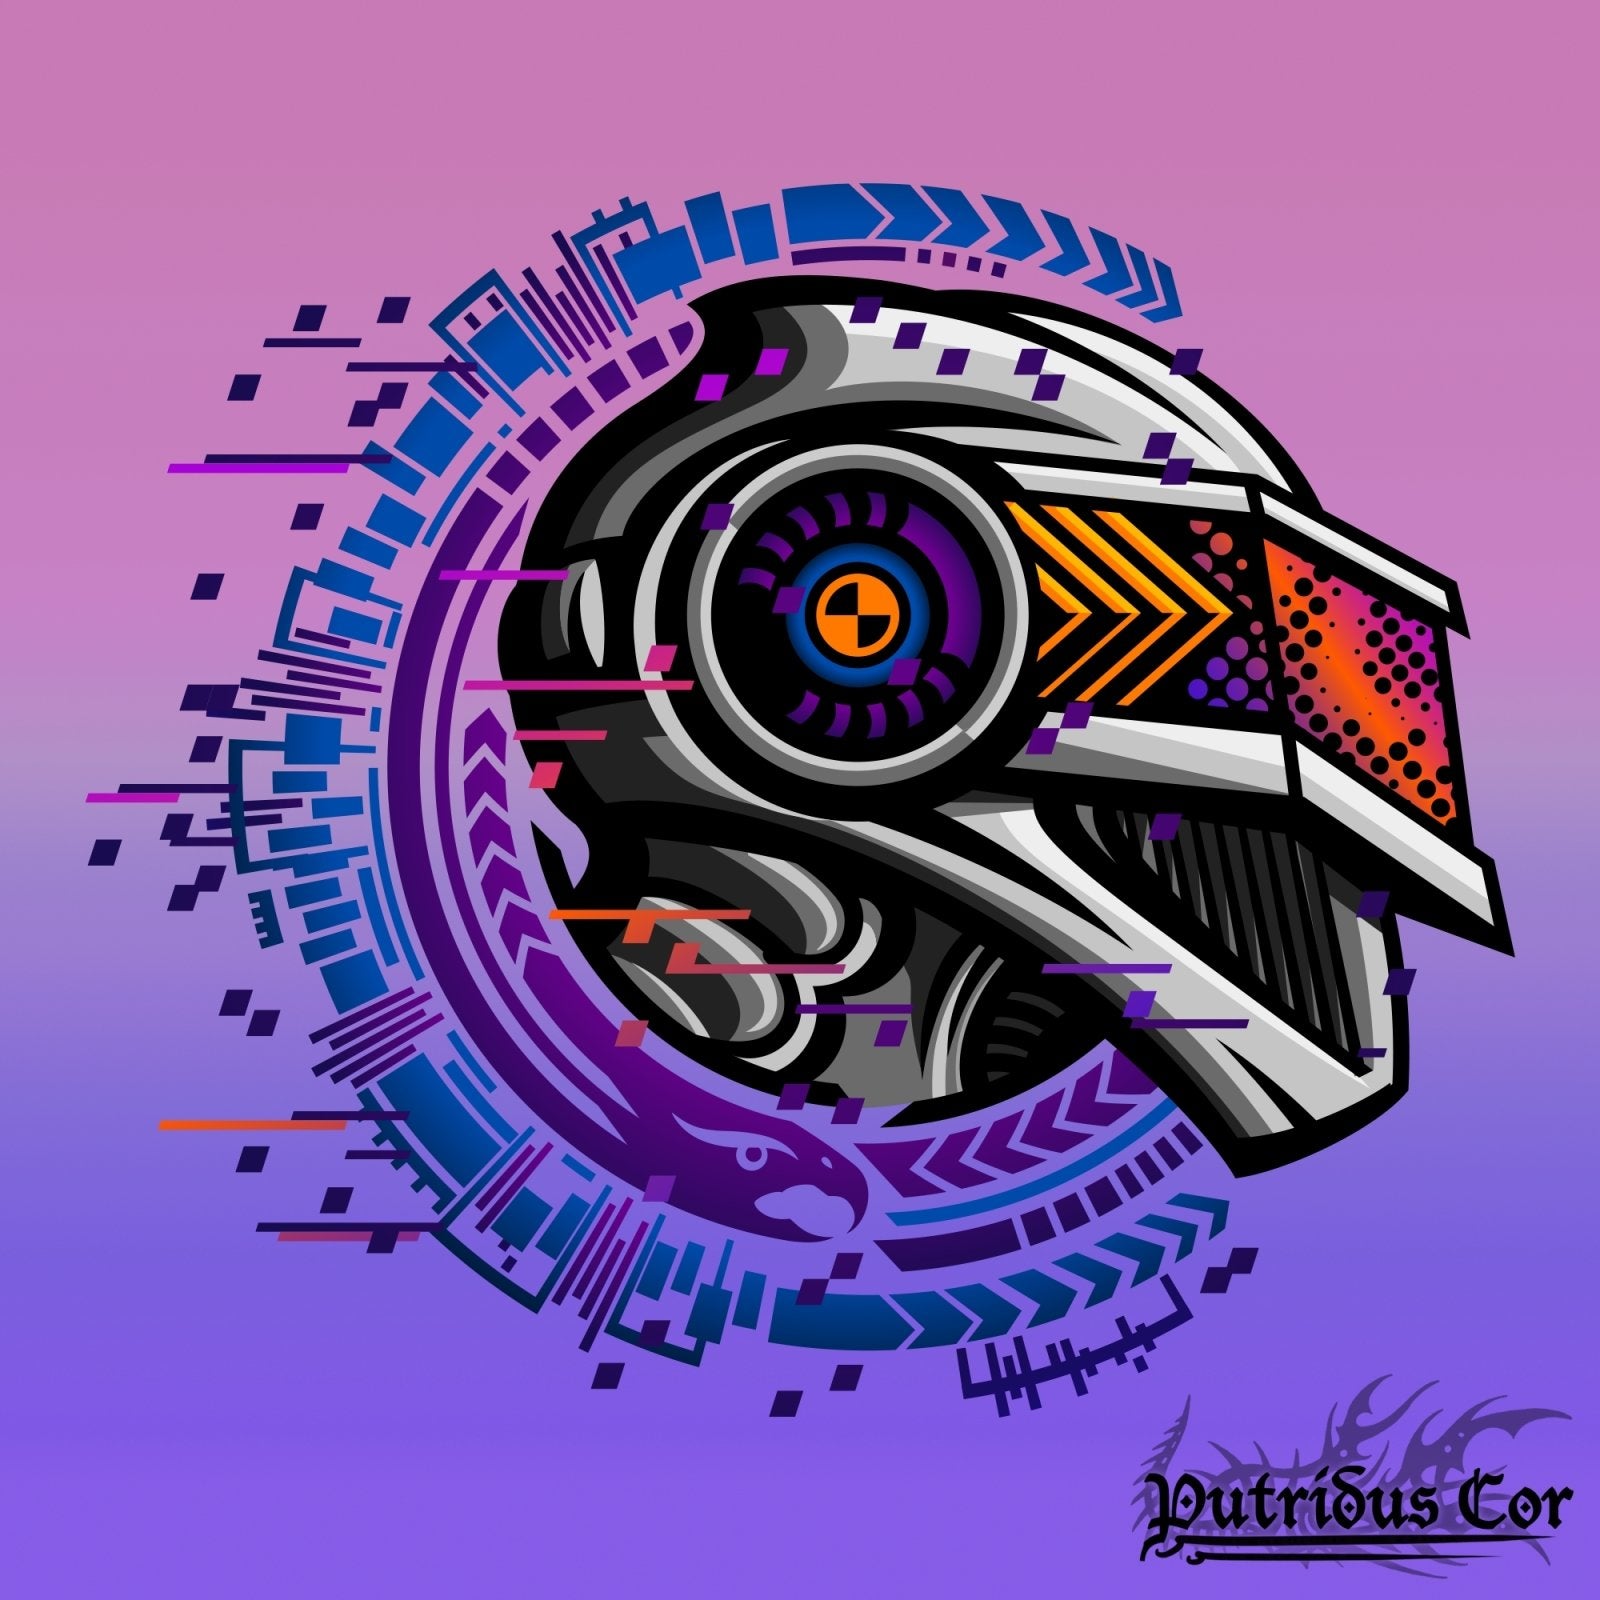 Custom, Cyberpunk and Fantasy Vector Logo Design - Graphic Artist Services for hire - Abysm Internal